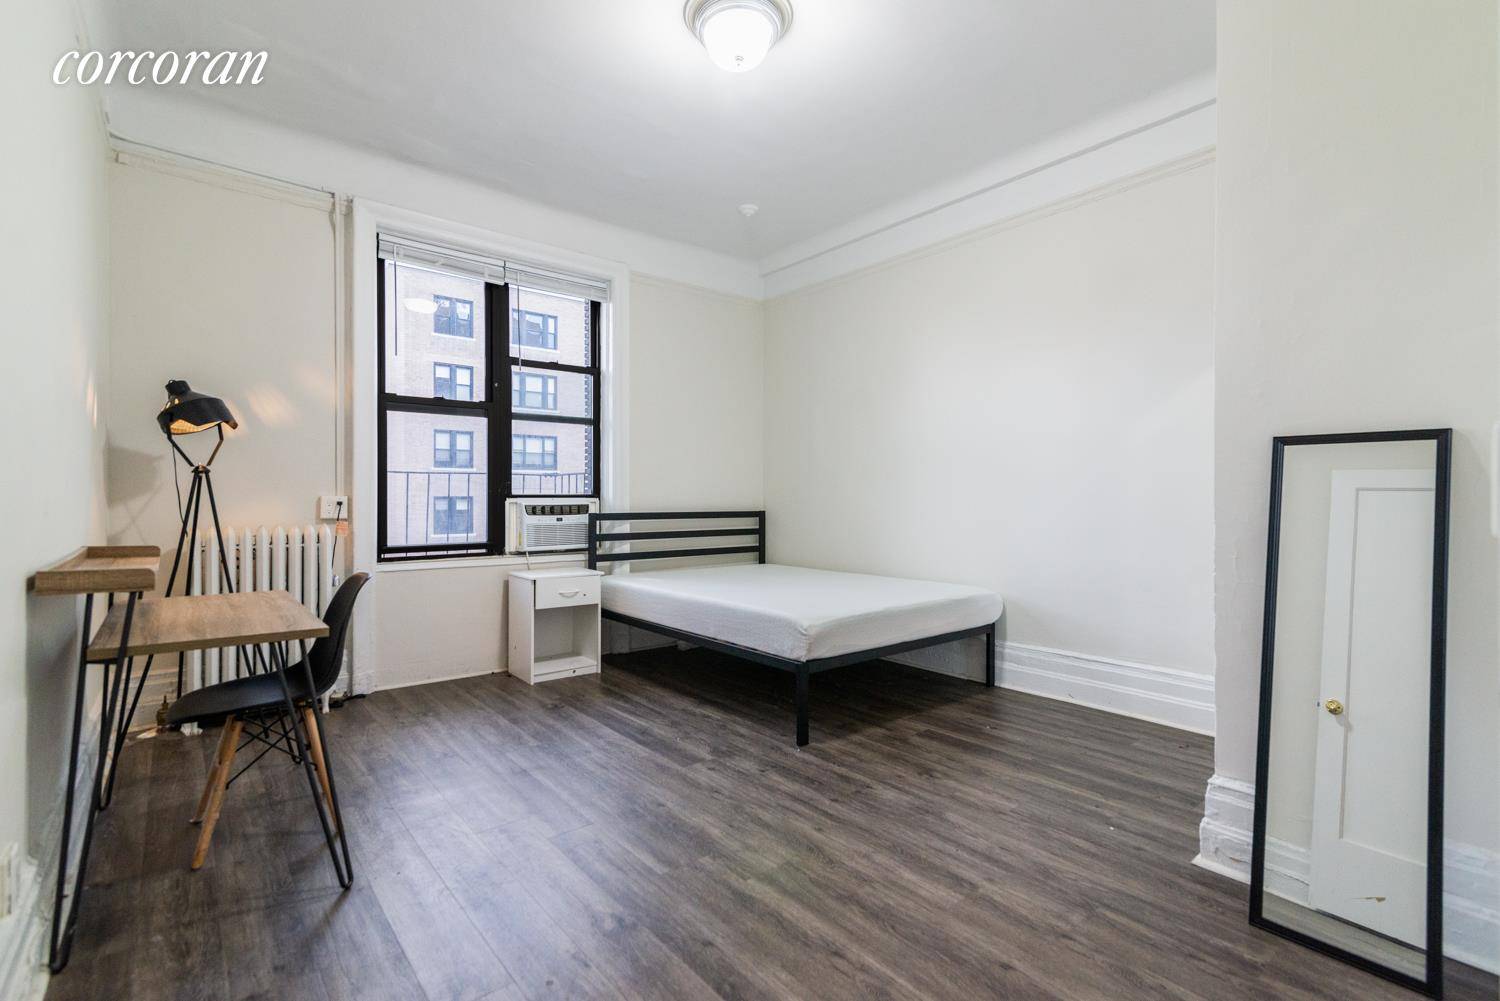 2br 1bath in doorman building at the corner of Broadway amp ; West 110th Street !